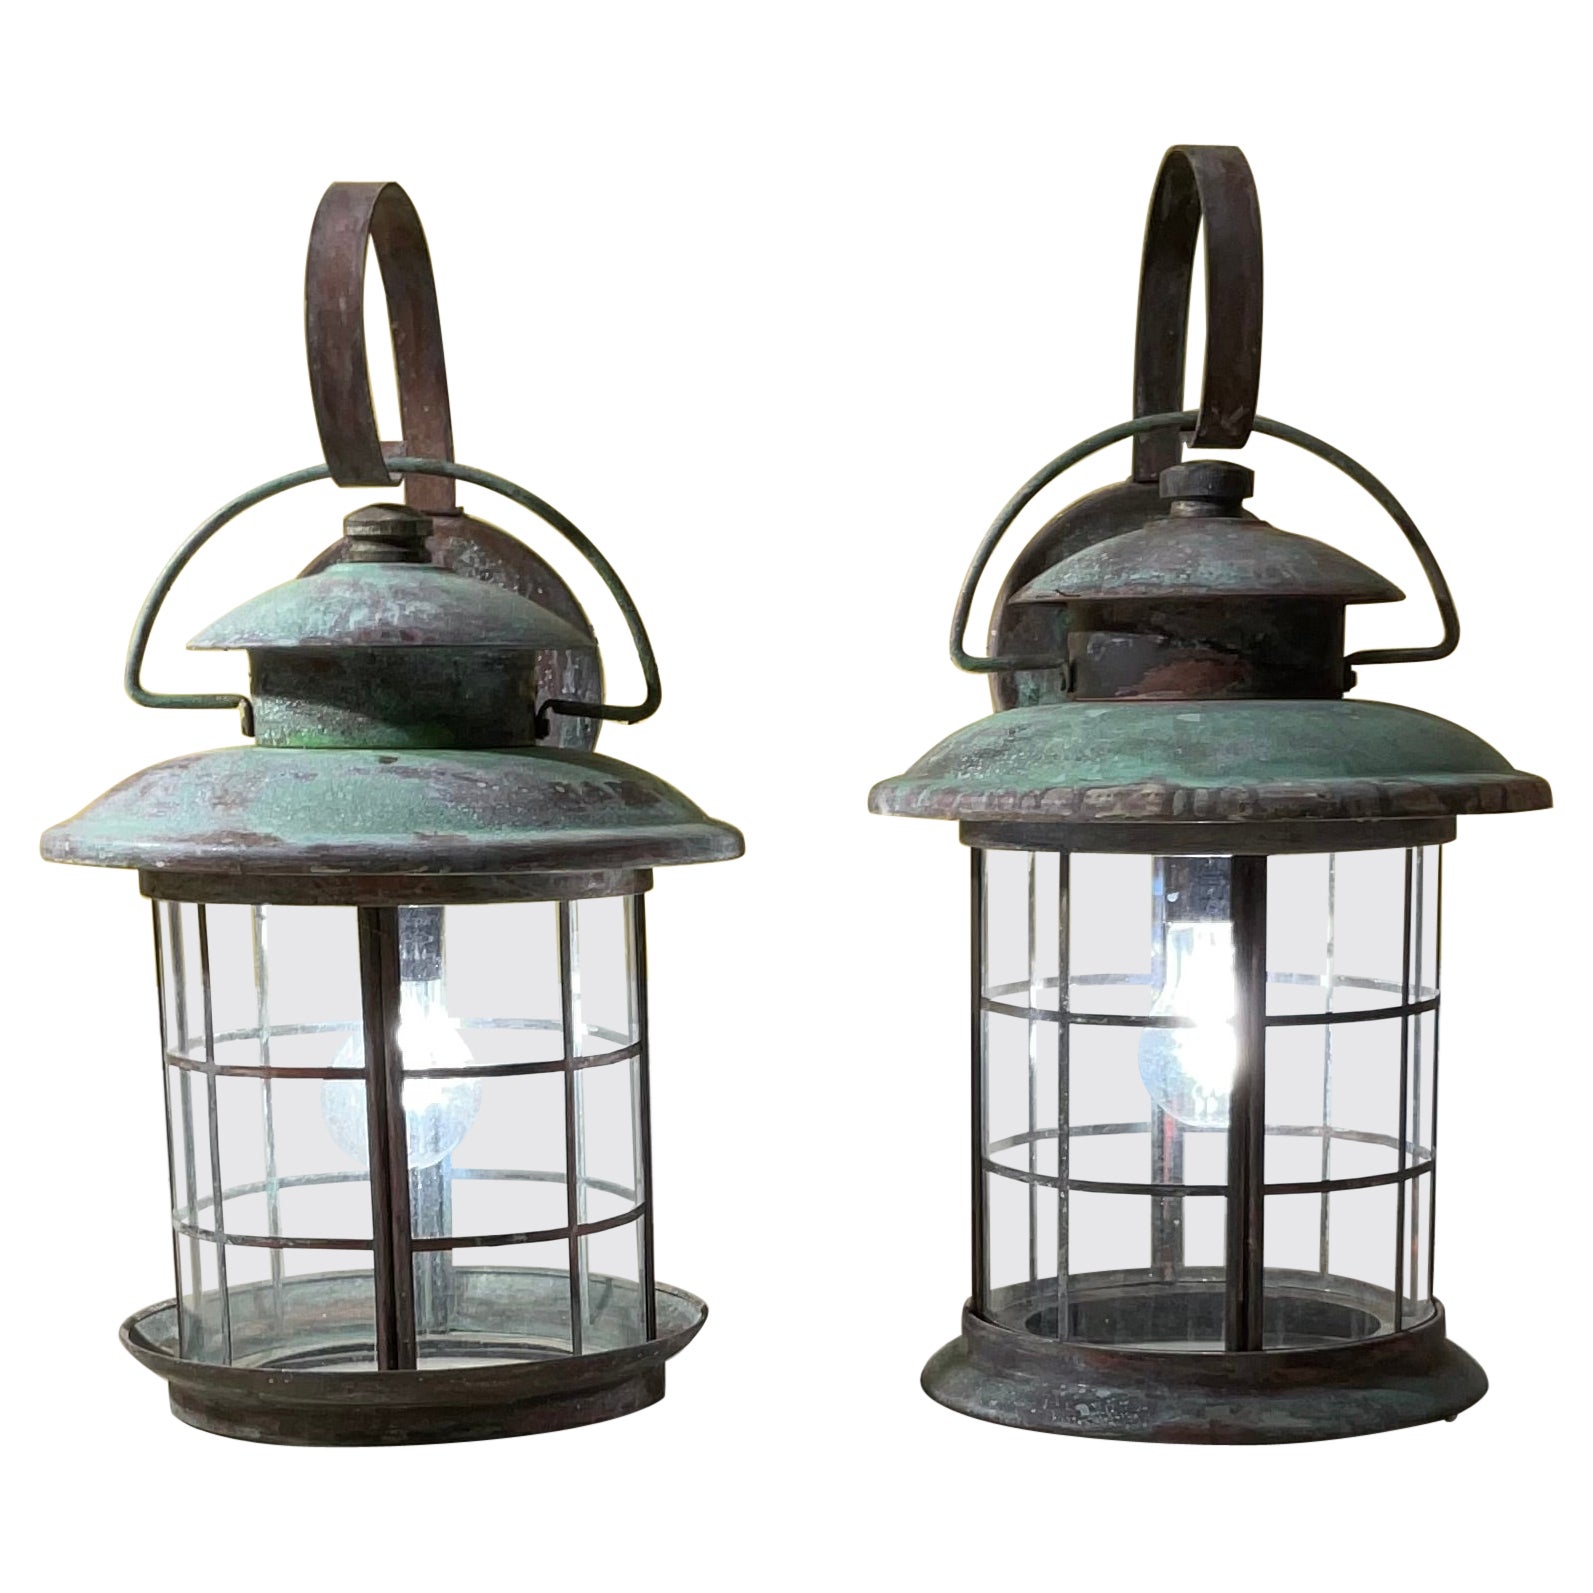 Pair of Vintage Handcrafted Wall-Mounted Brass Lantern